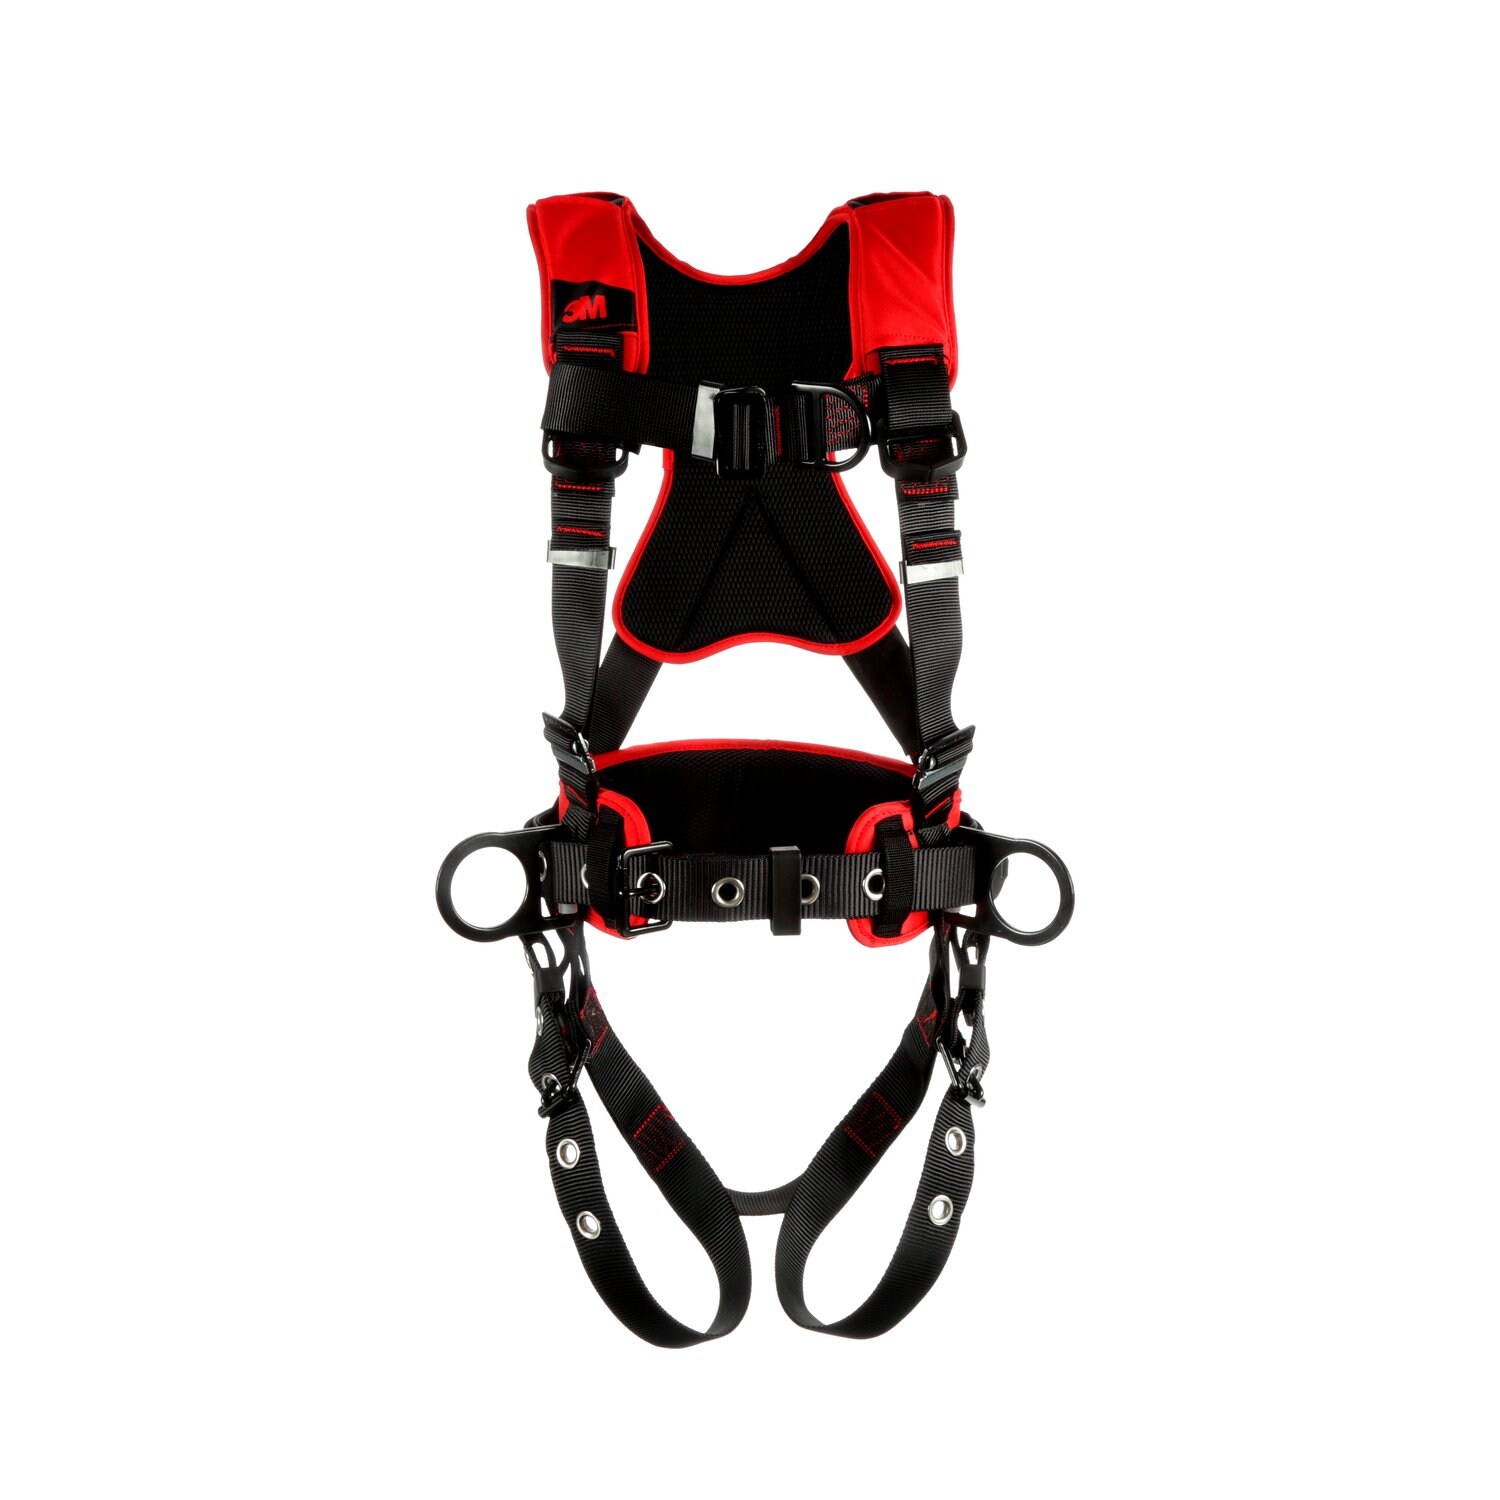 7012816631 - 3M Protecta P200 Comfort Construction Climbing/Positioning Safety Harness 1161228, X-Large